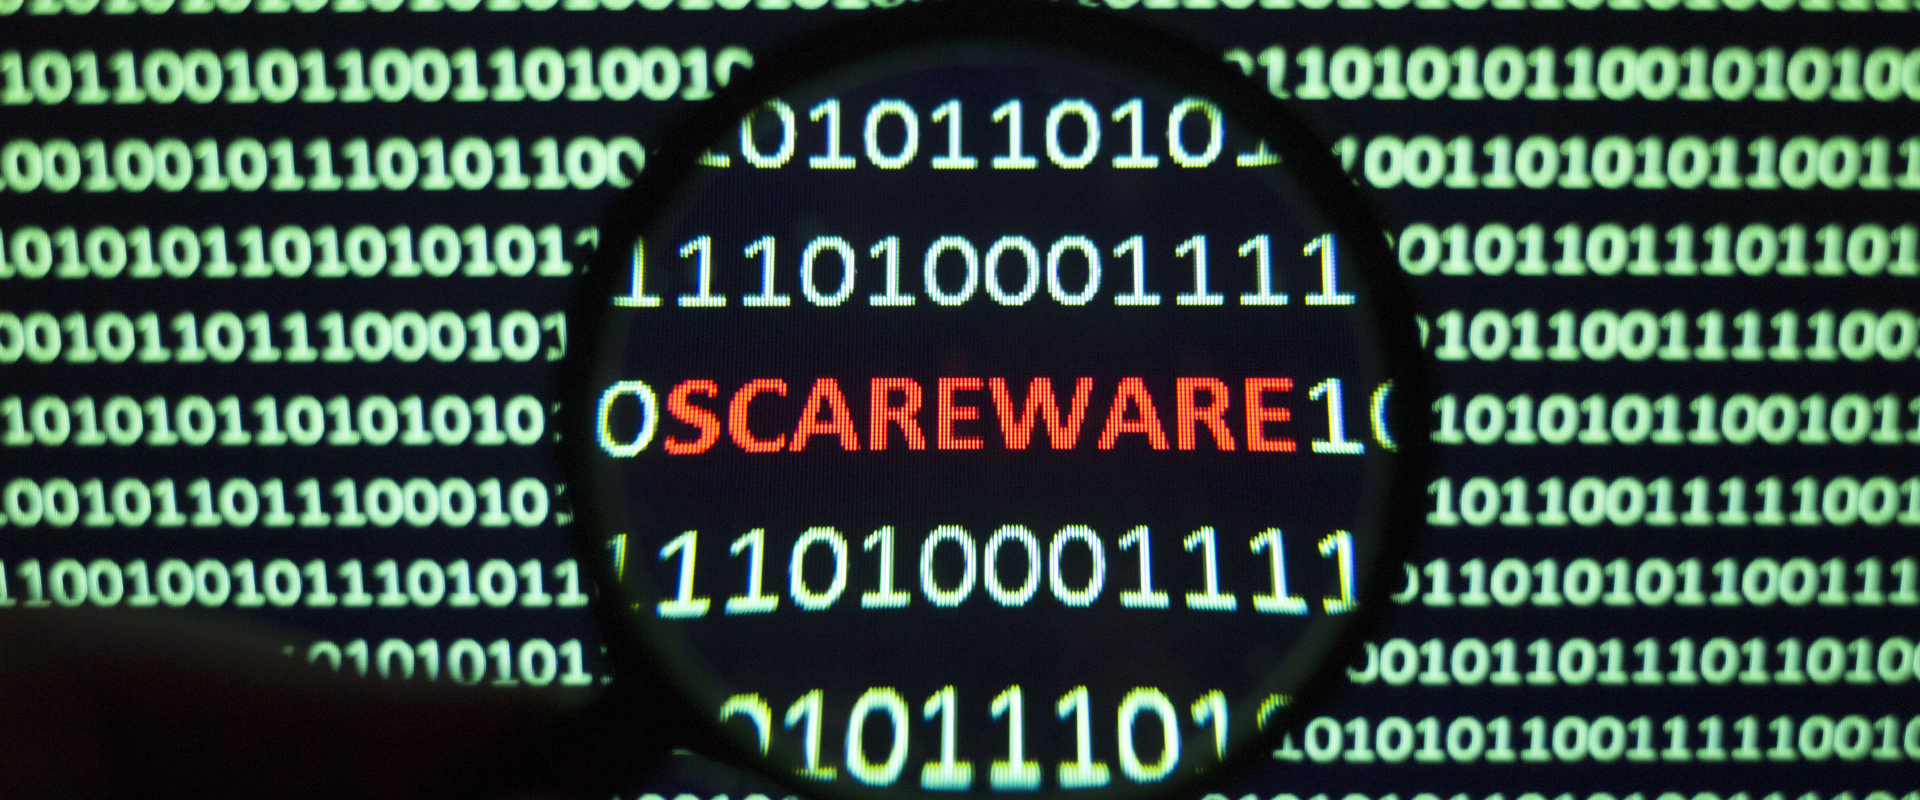 Outsmarting Scareware: A NetConnect Case Study on Cyber Resilience